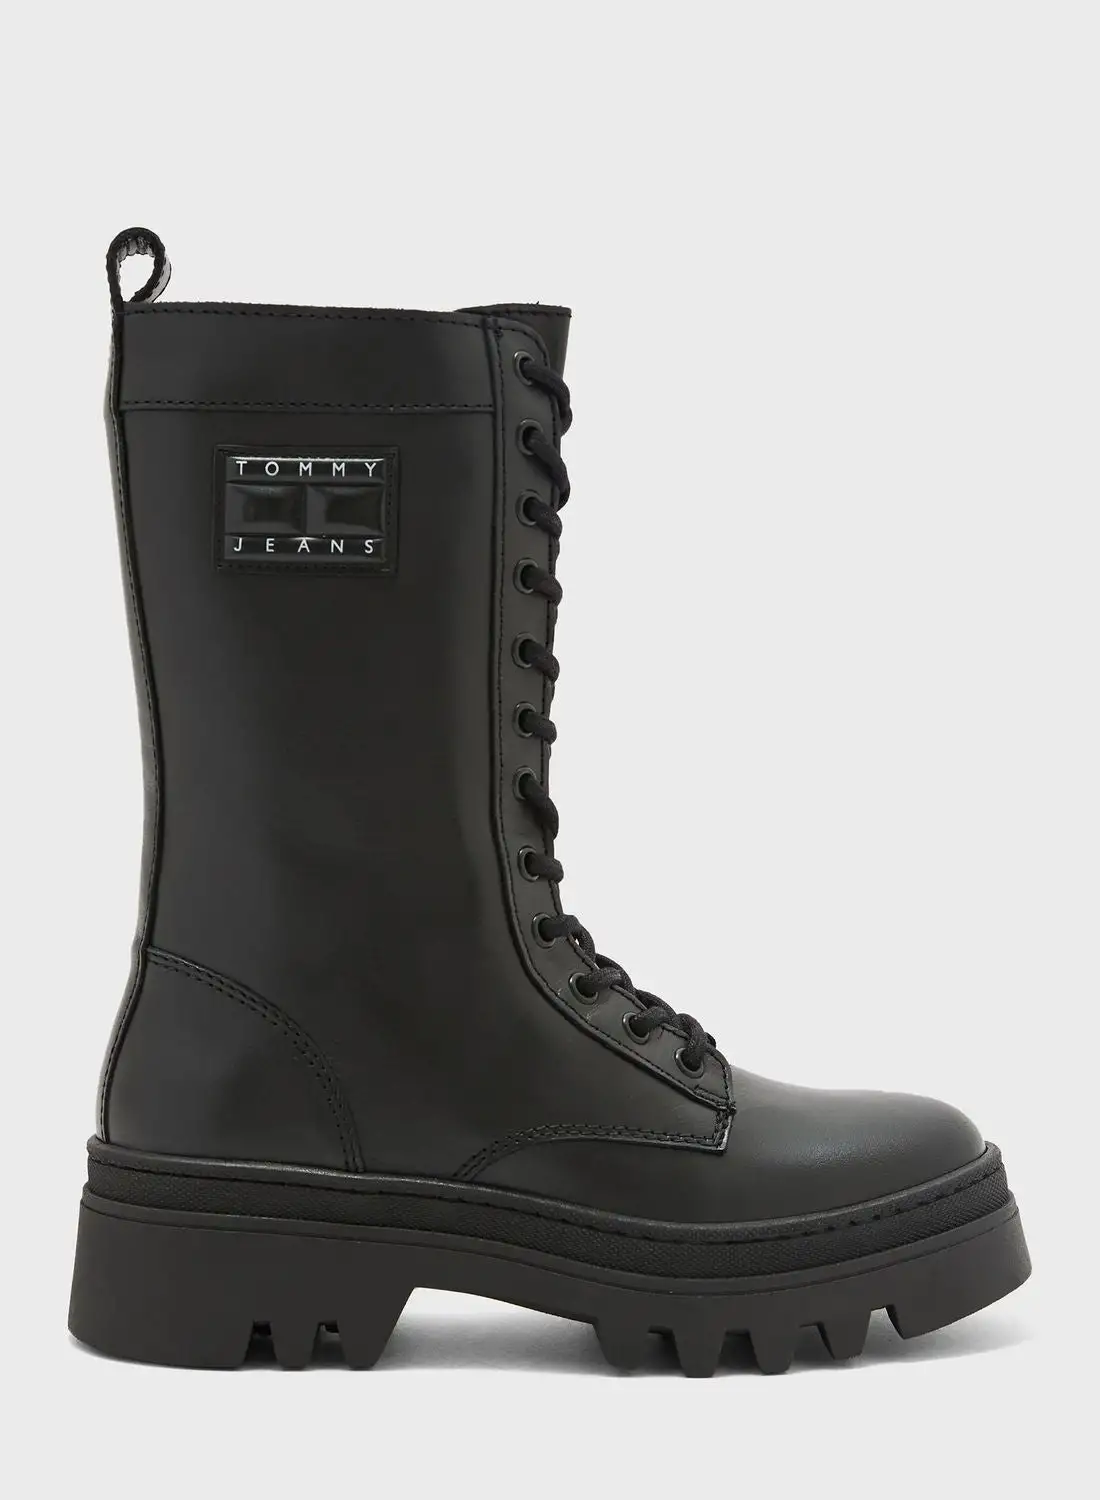 TOMMY HILFIGER Fashion Lace Up Boots